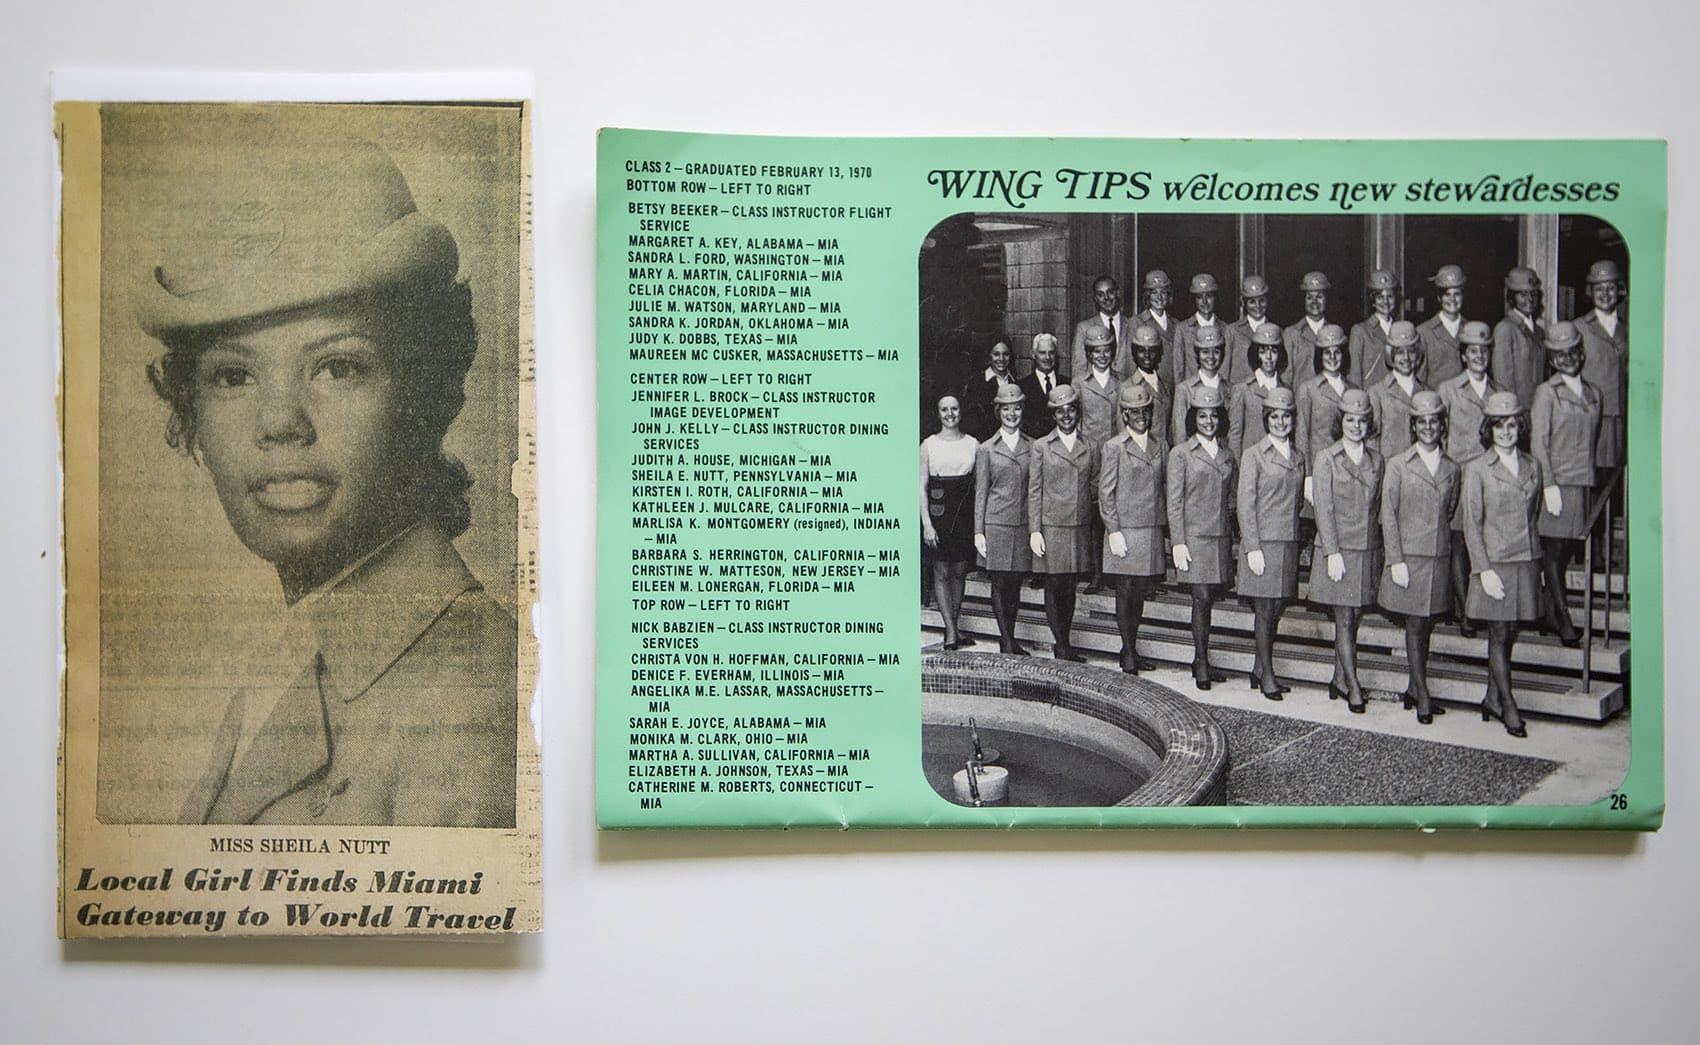 A newspaper clipping from a Philadelphia paper announces Sheila Nutt's hiring by Pan Am, left, and a photograph in the Pan Am publication Wing Tips shows the new class of stewardesses. (Jesse Costa/WBUR)